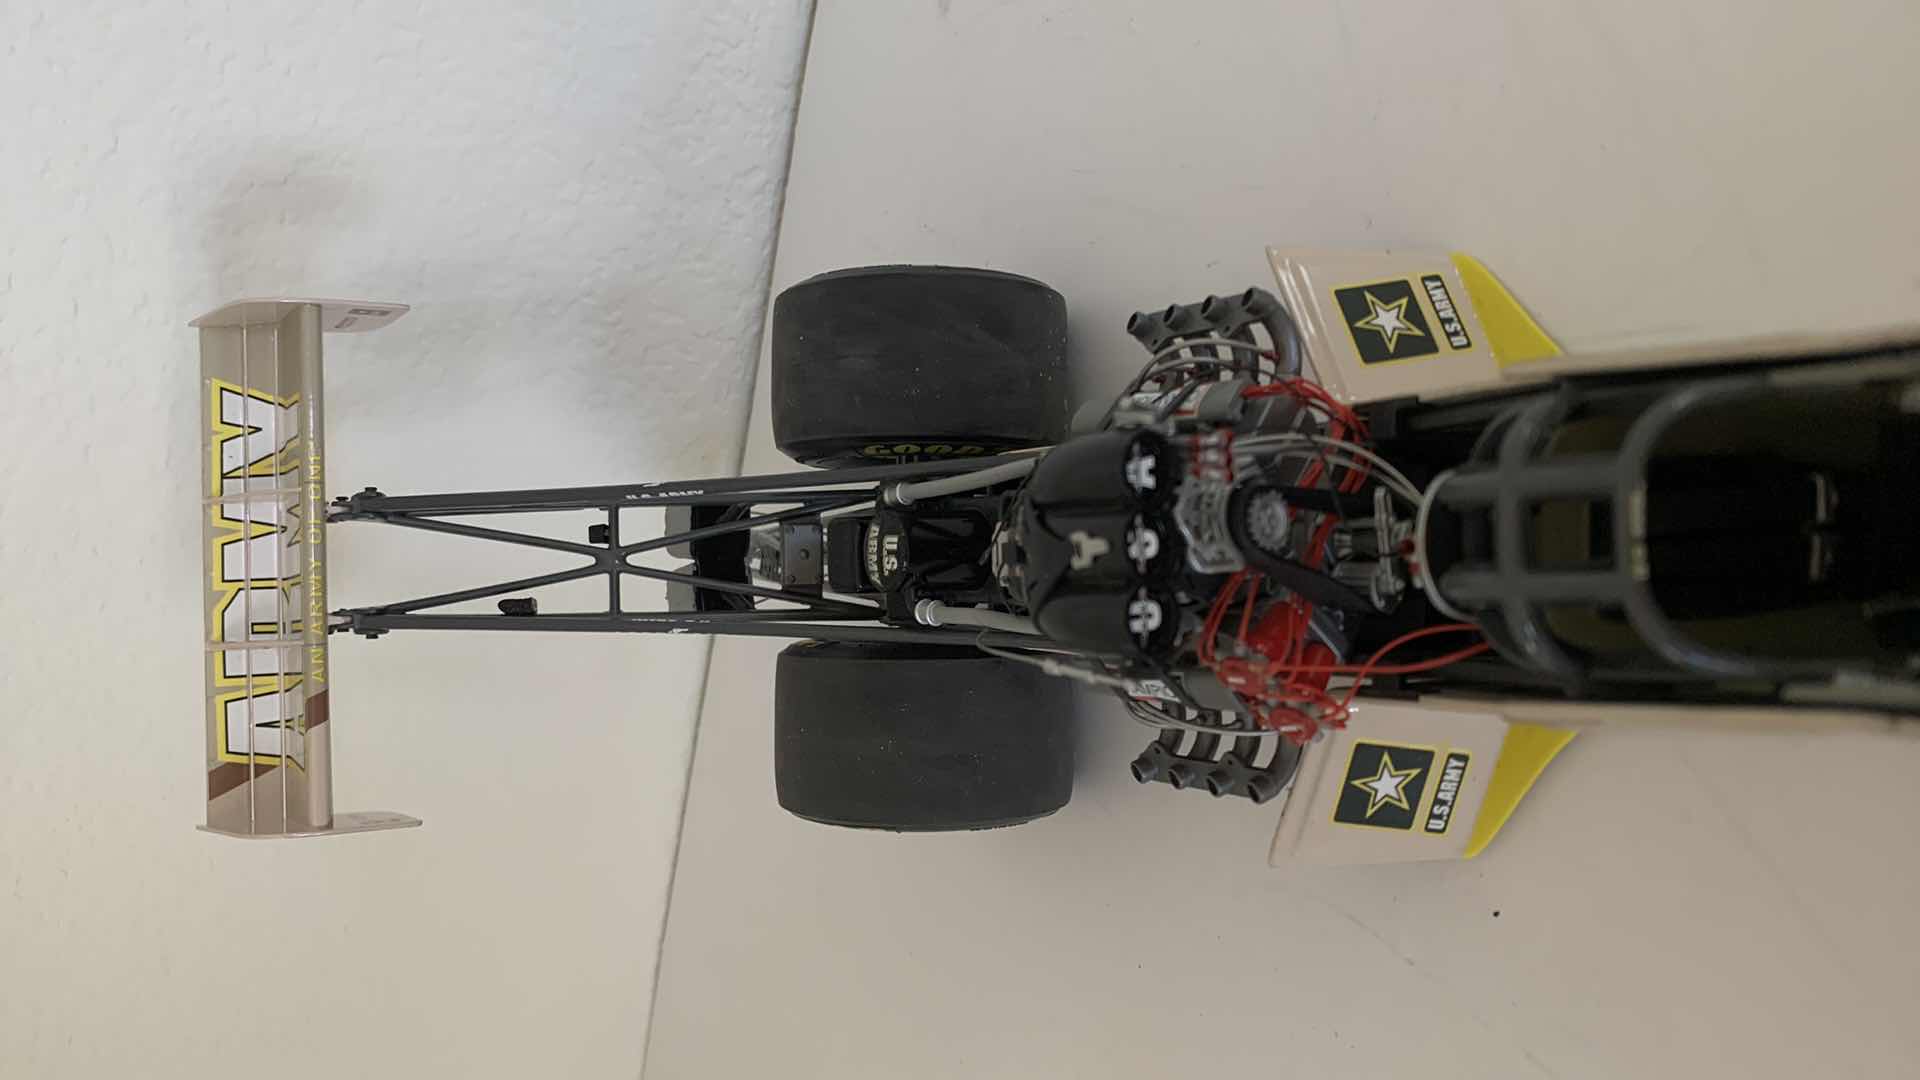 Photo 5 of ARMY TOP FUEL DIE CAST RACE CAR.